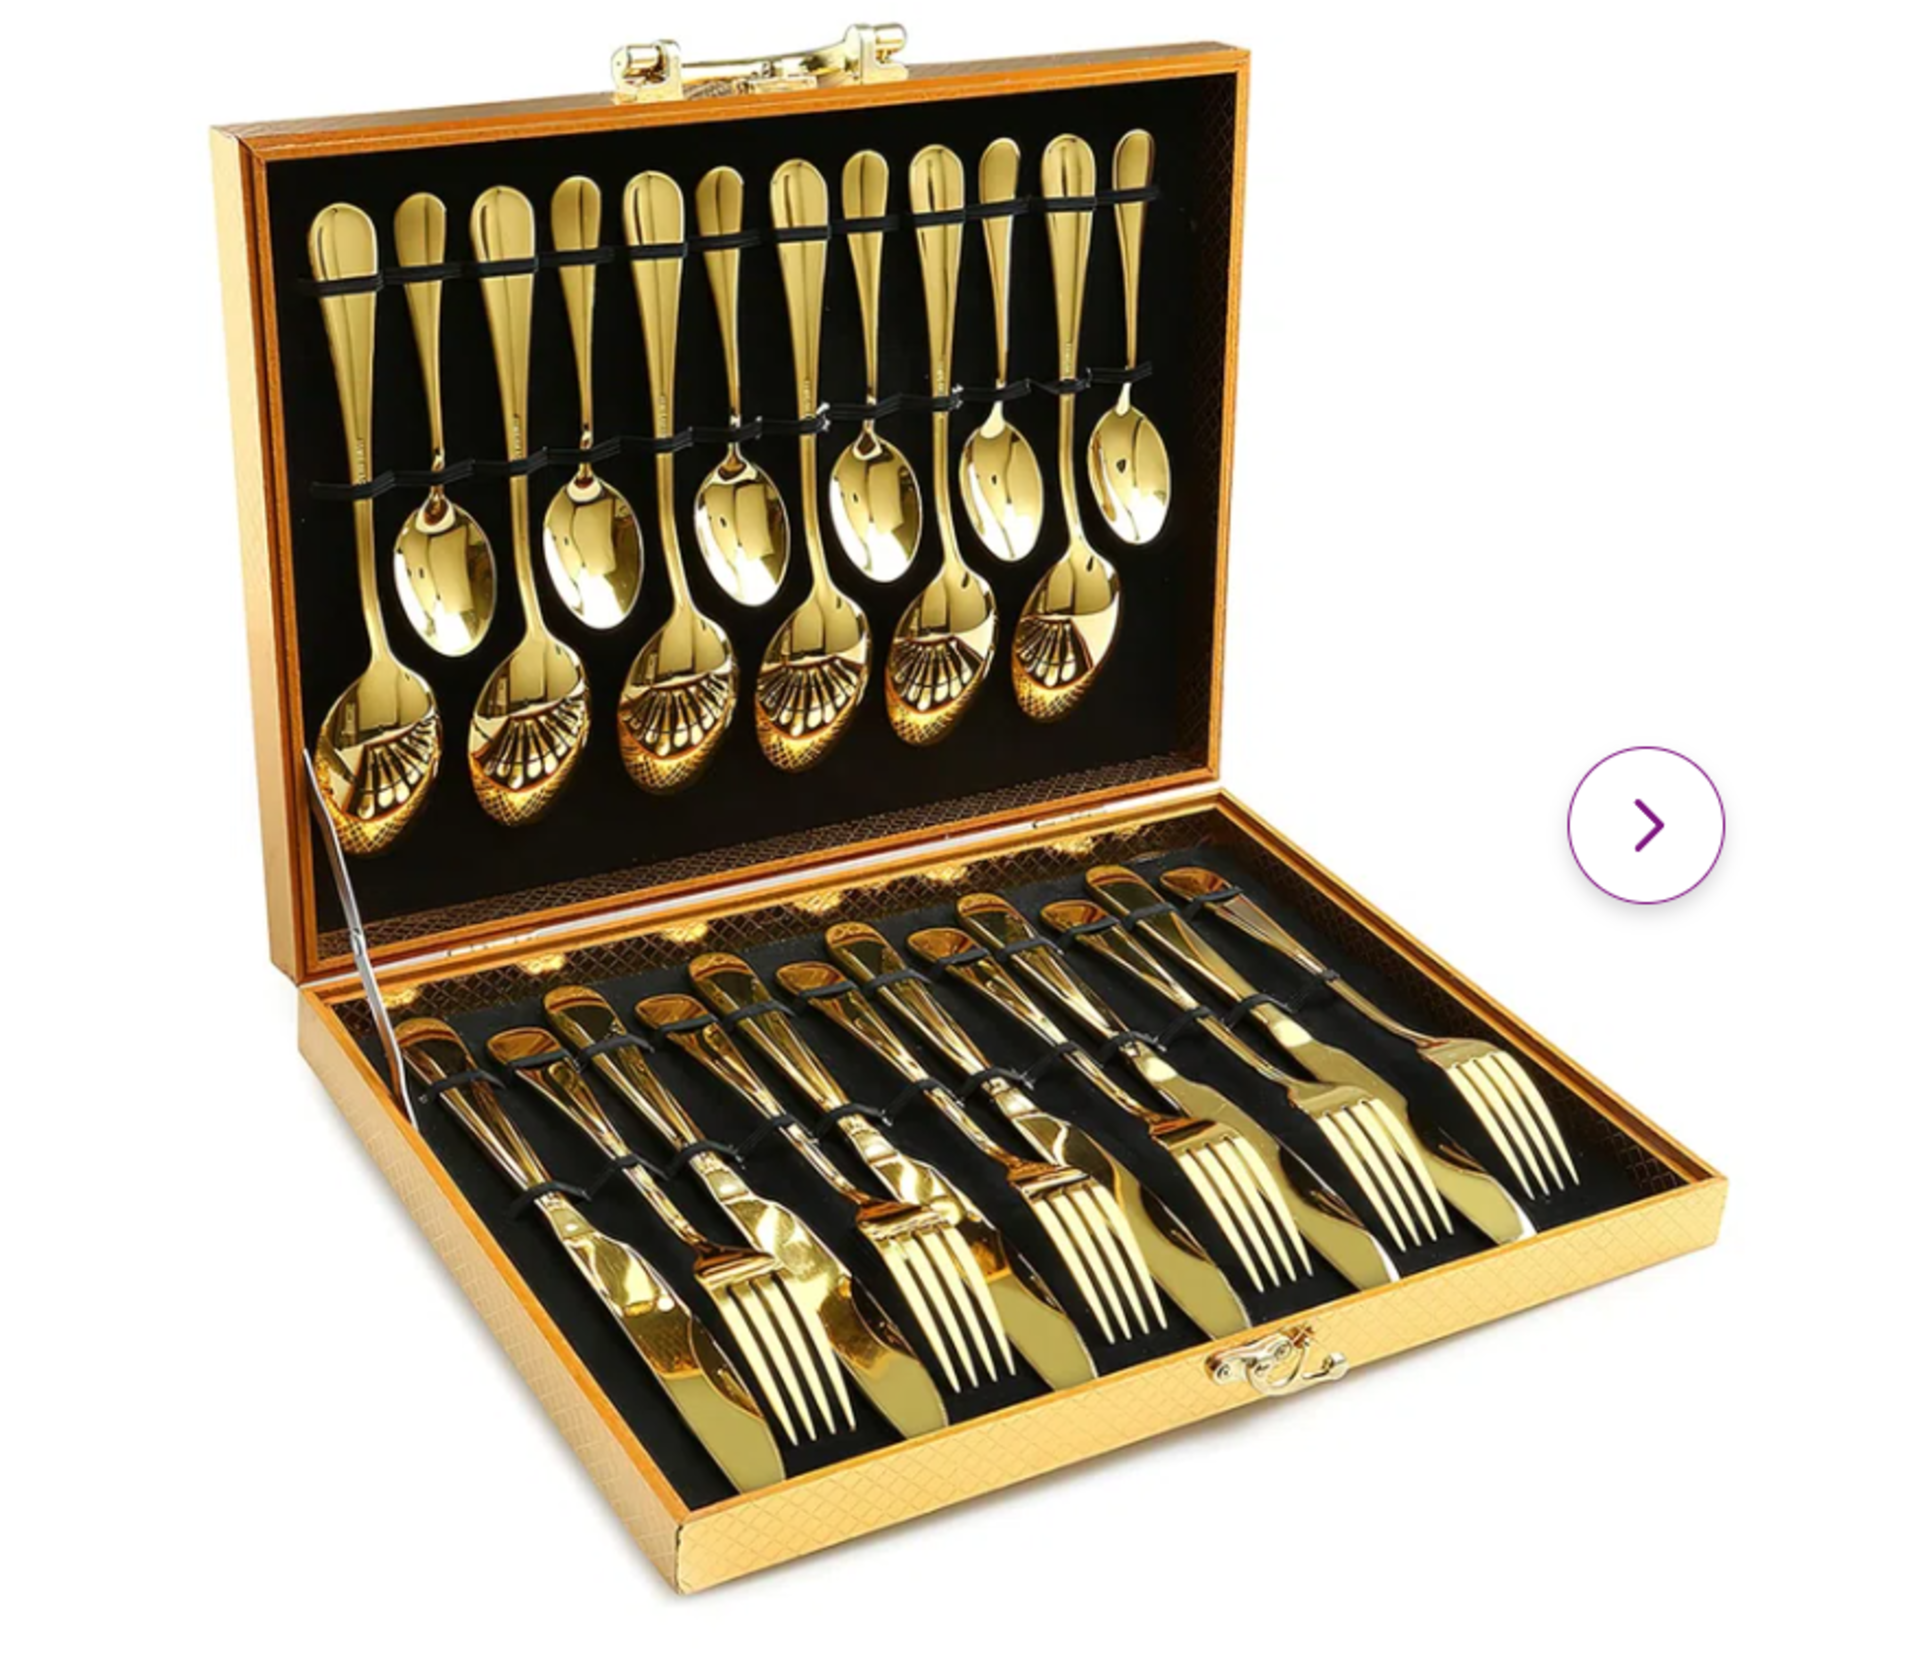 24 Piece Stainless Steel Cutlery Set , Service for 6 Storage drawers blend in beautifully in your